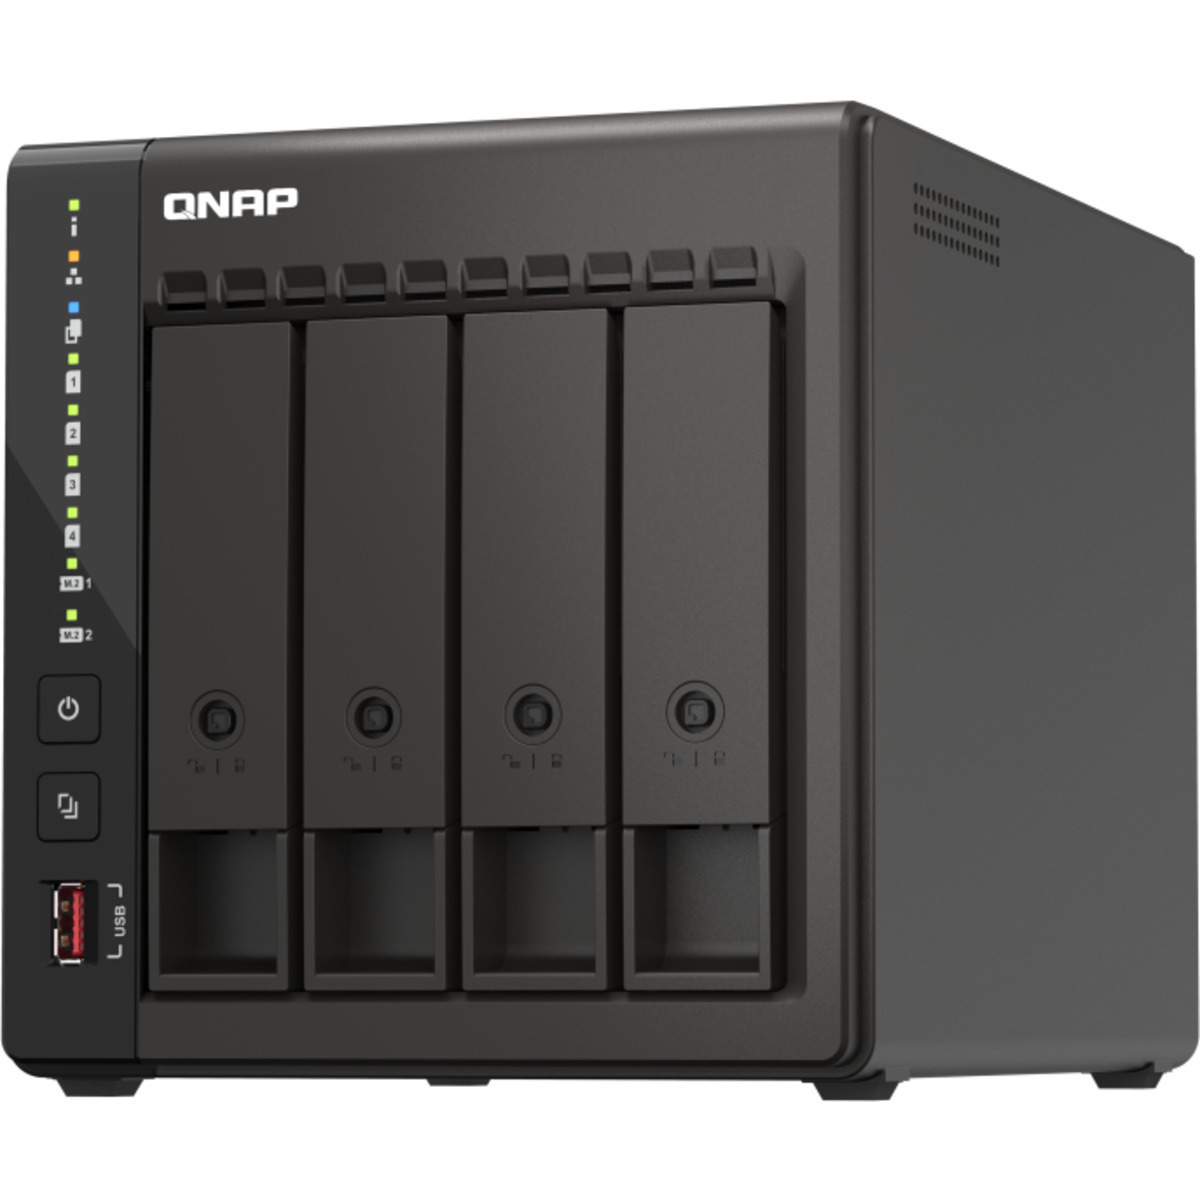 buy $939 QNAP TS-453E 16tb Desktop NAS - Network Attached Storage Device 4x4000gb Toshiba MN Series MN08ADA400E 3.5 7200rpm SATA 6Gb/s HDD NAS Class Drives Installed - Burn-In Tested - ON SALE - nas headquarters buy network attached storage server device das new raid-5 free shipping simply usa TS-453E